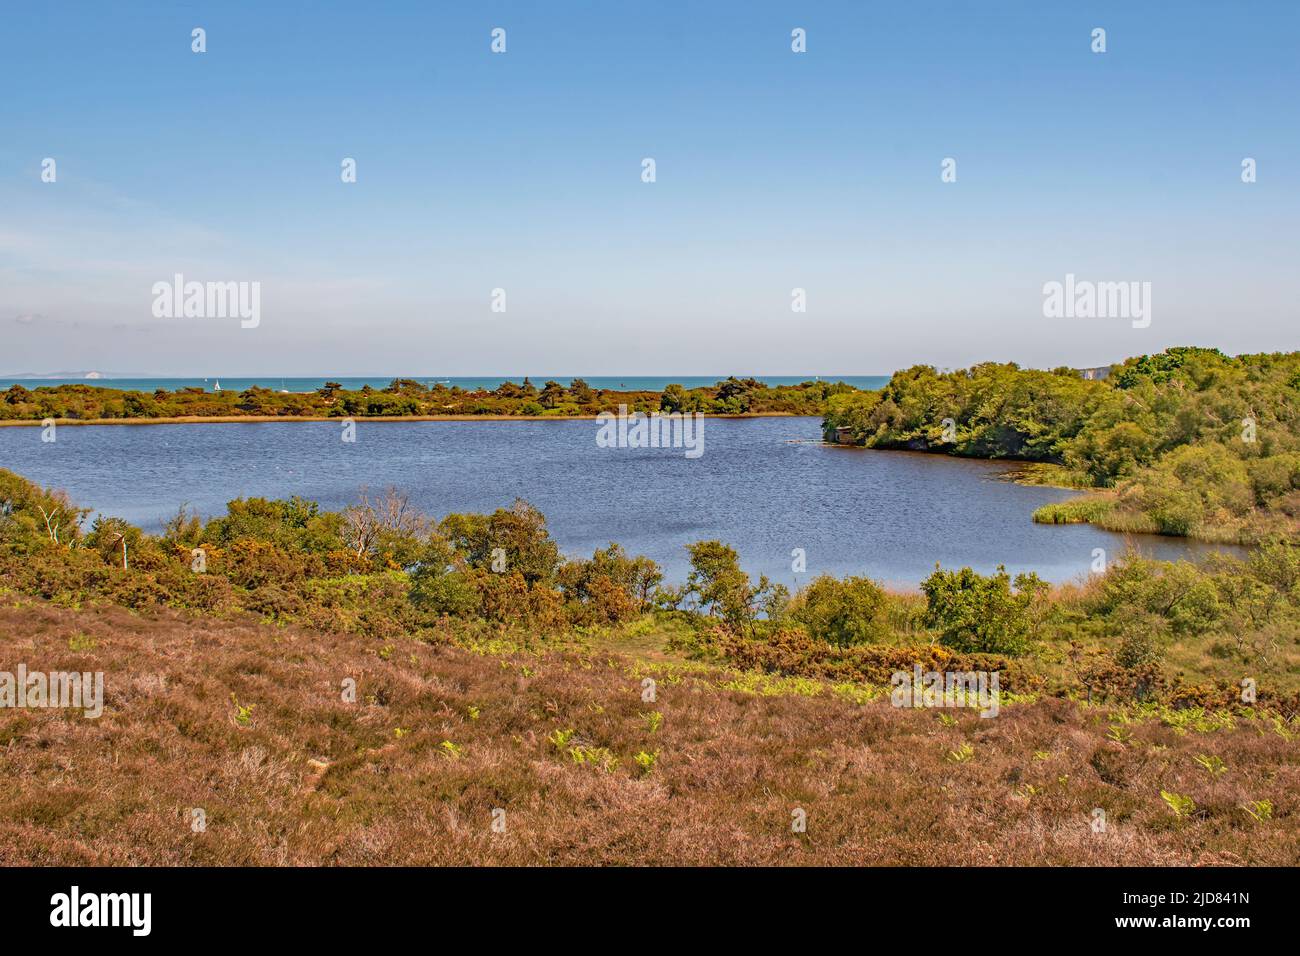 A view across an enclosed lake at Sandbanks Nature Reserve to the sea Dorset England Stock Photo